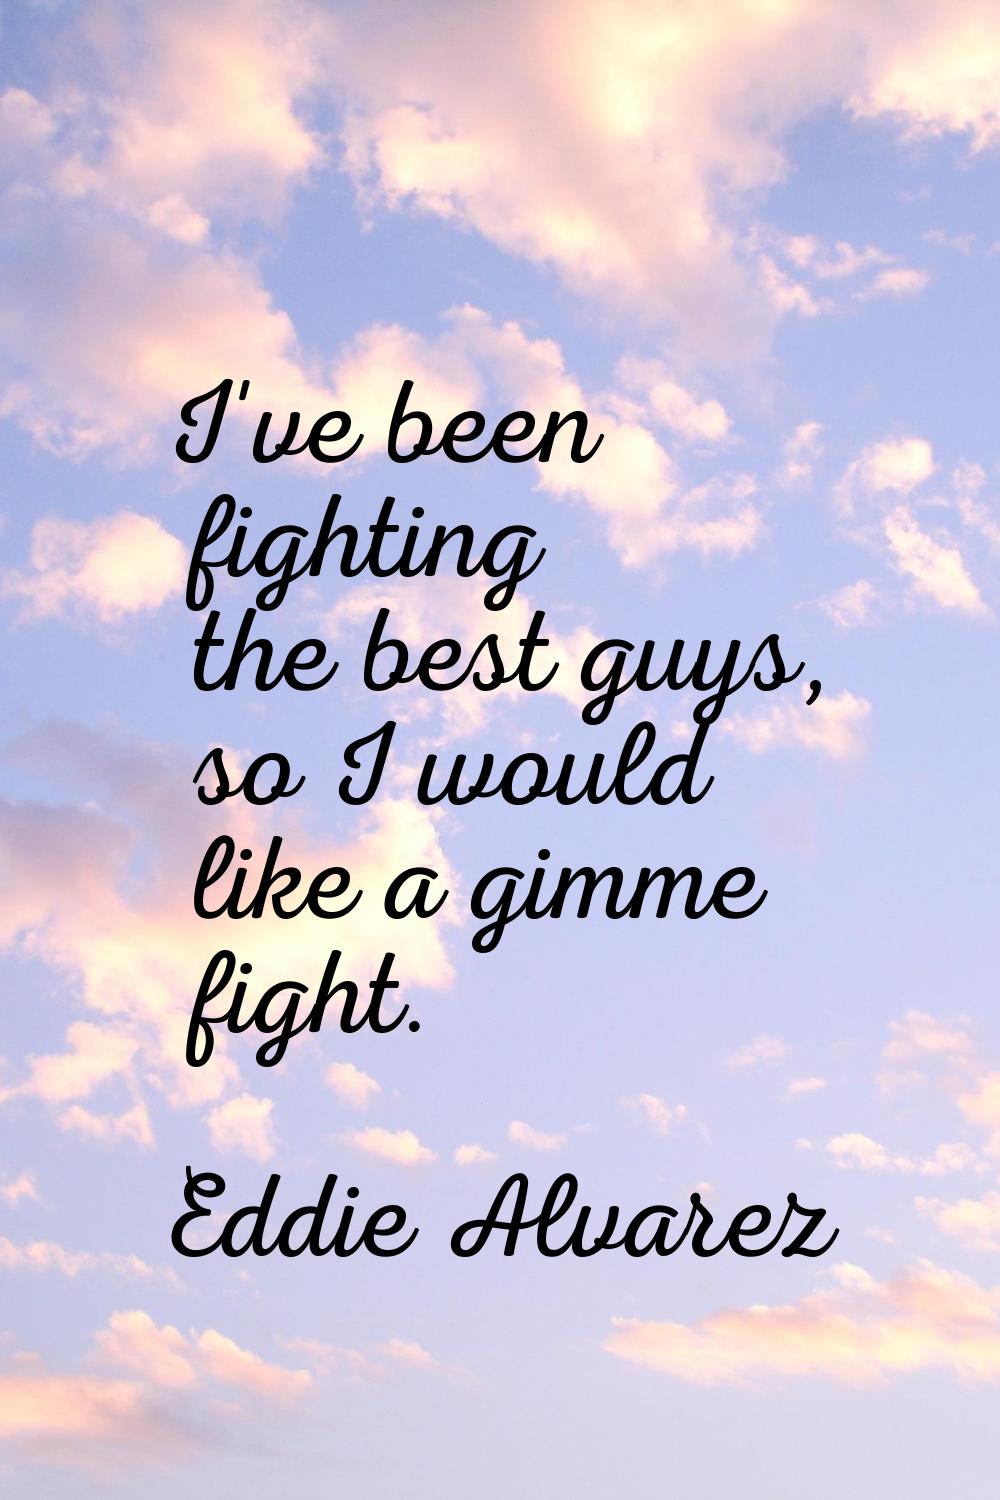 I've been fighting the best guys, so I would like a gimme fight.